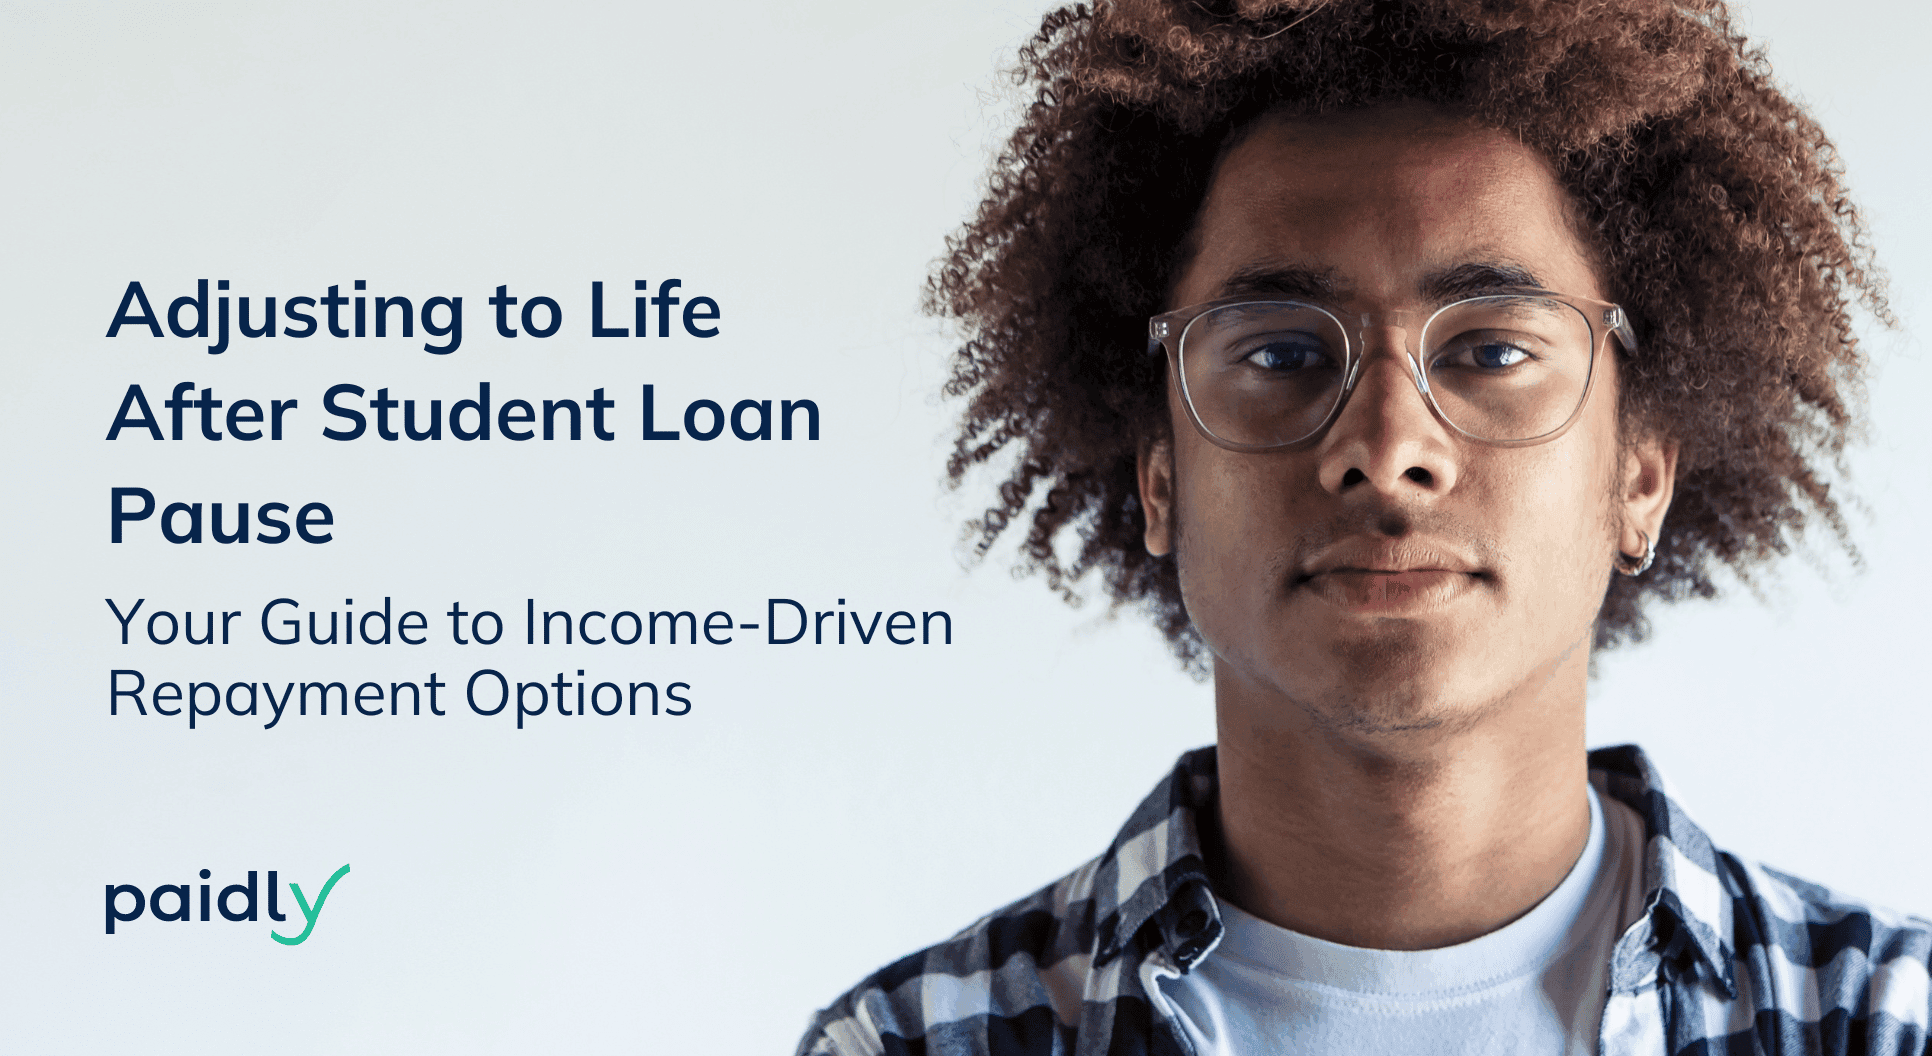 Adjusting to Life After Student Loan Pause: Your Guide to Income-Driven Repayment Options